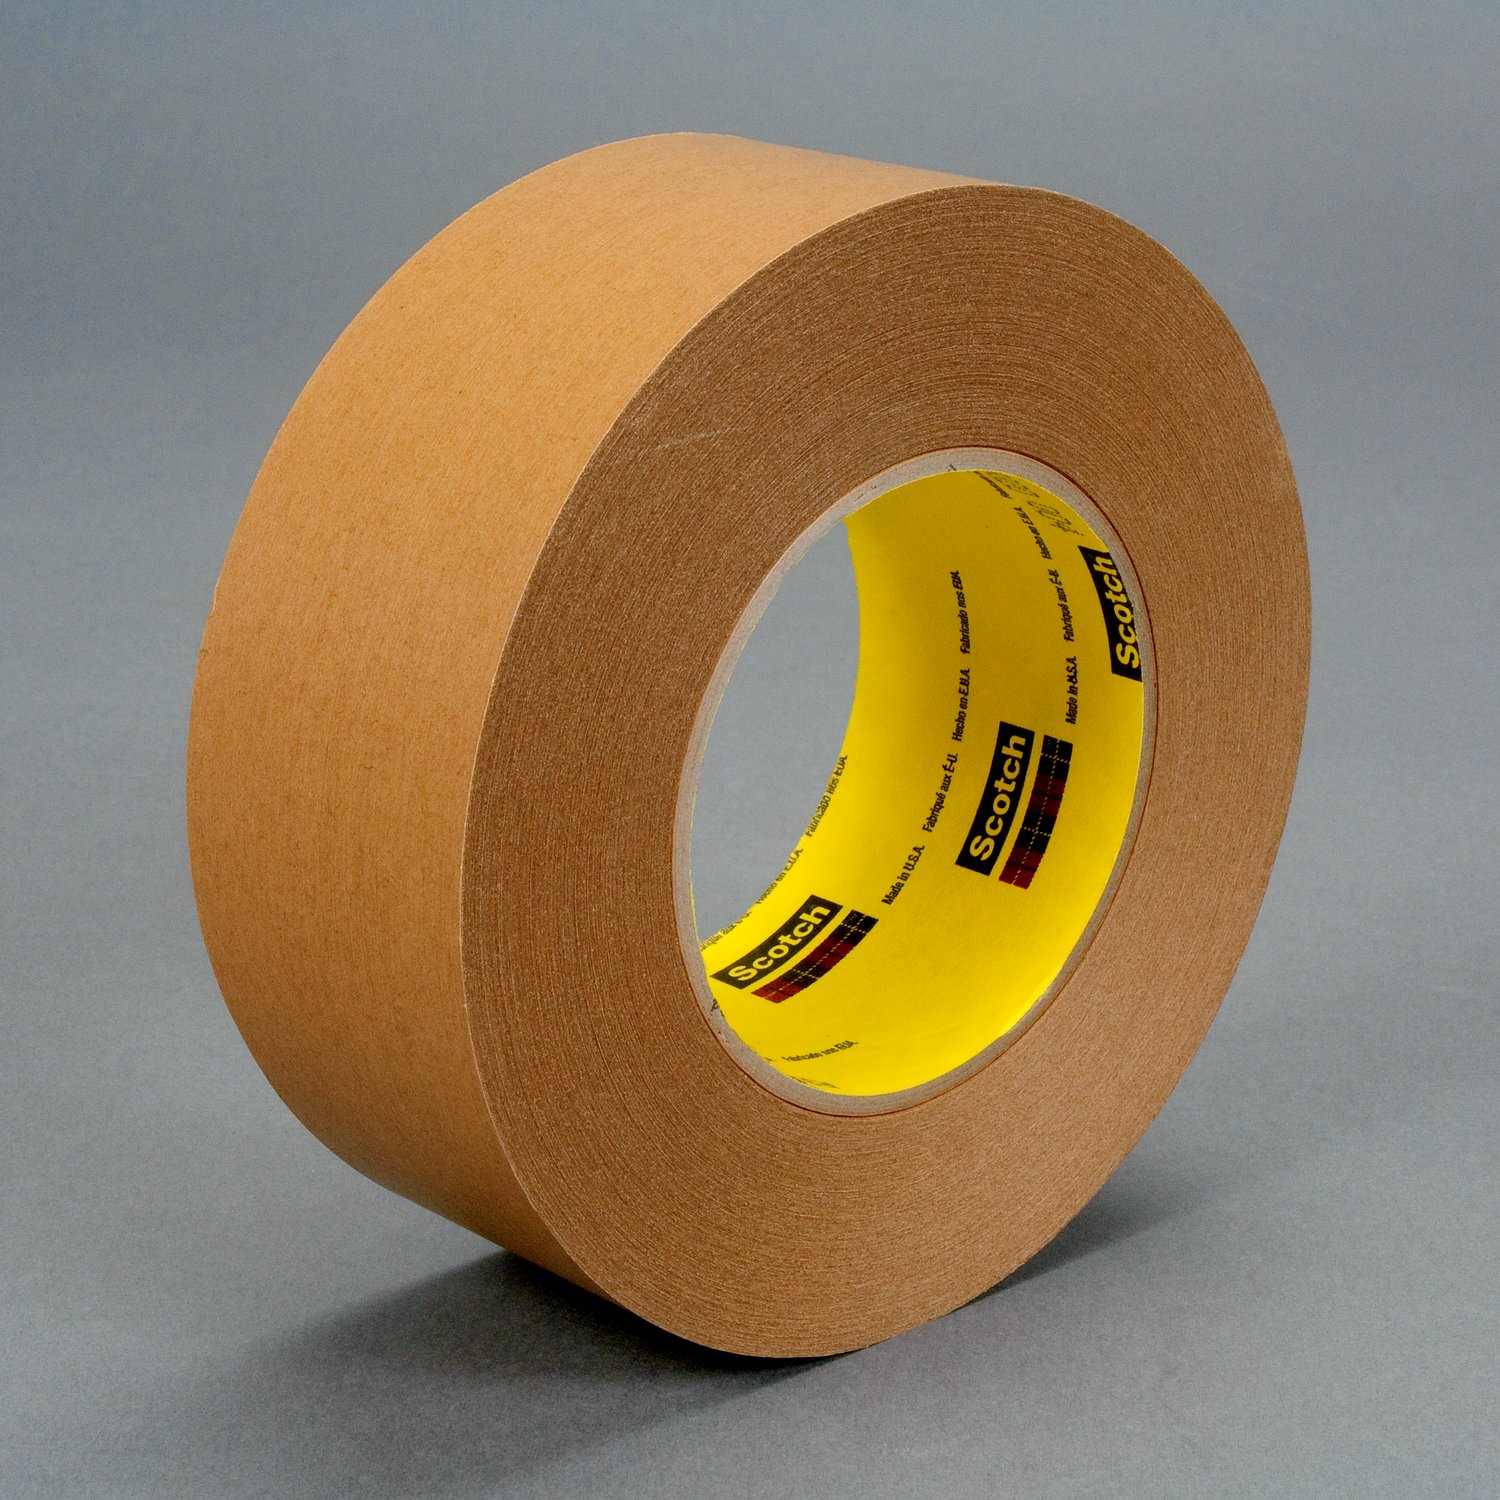 7100028044 - 3M Repulpable Strong Single Coated Tape R3187, Kraft, 96 mm x 55 m, 7.5
mil, 8 rolls per case